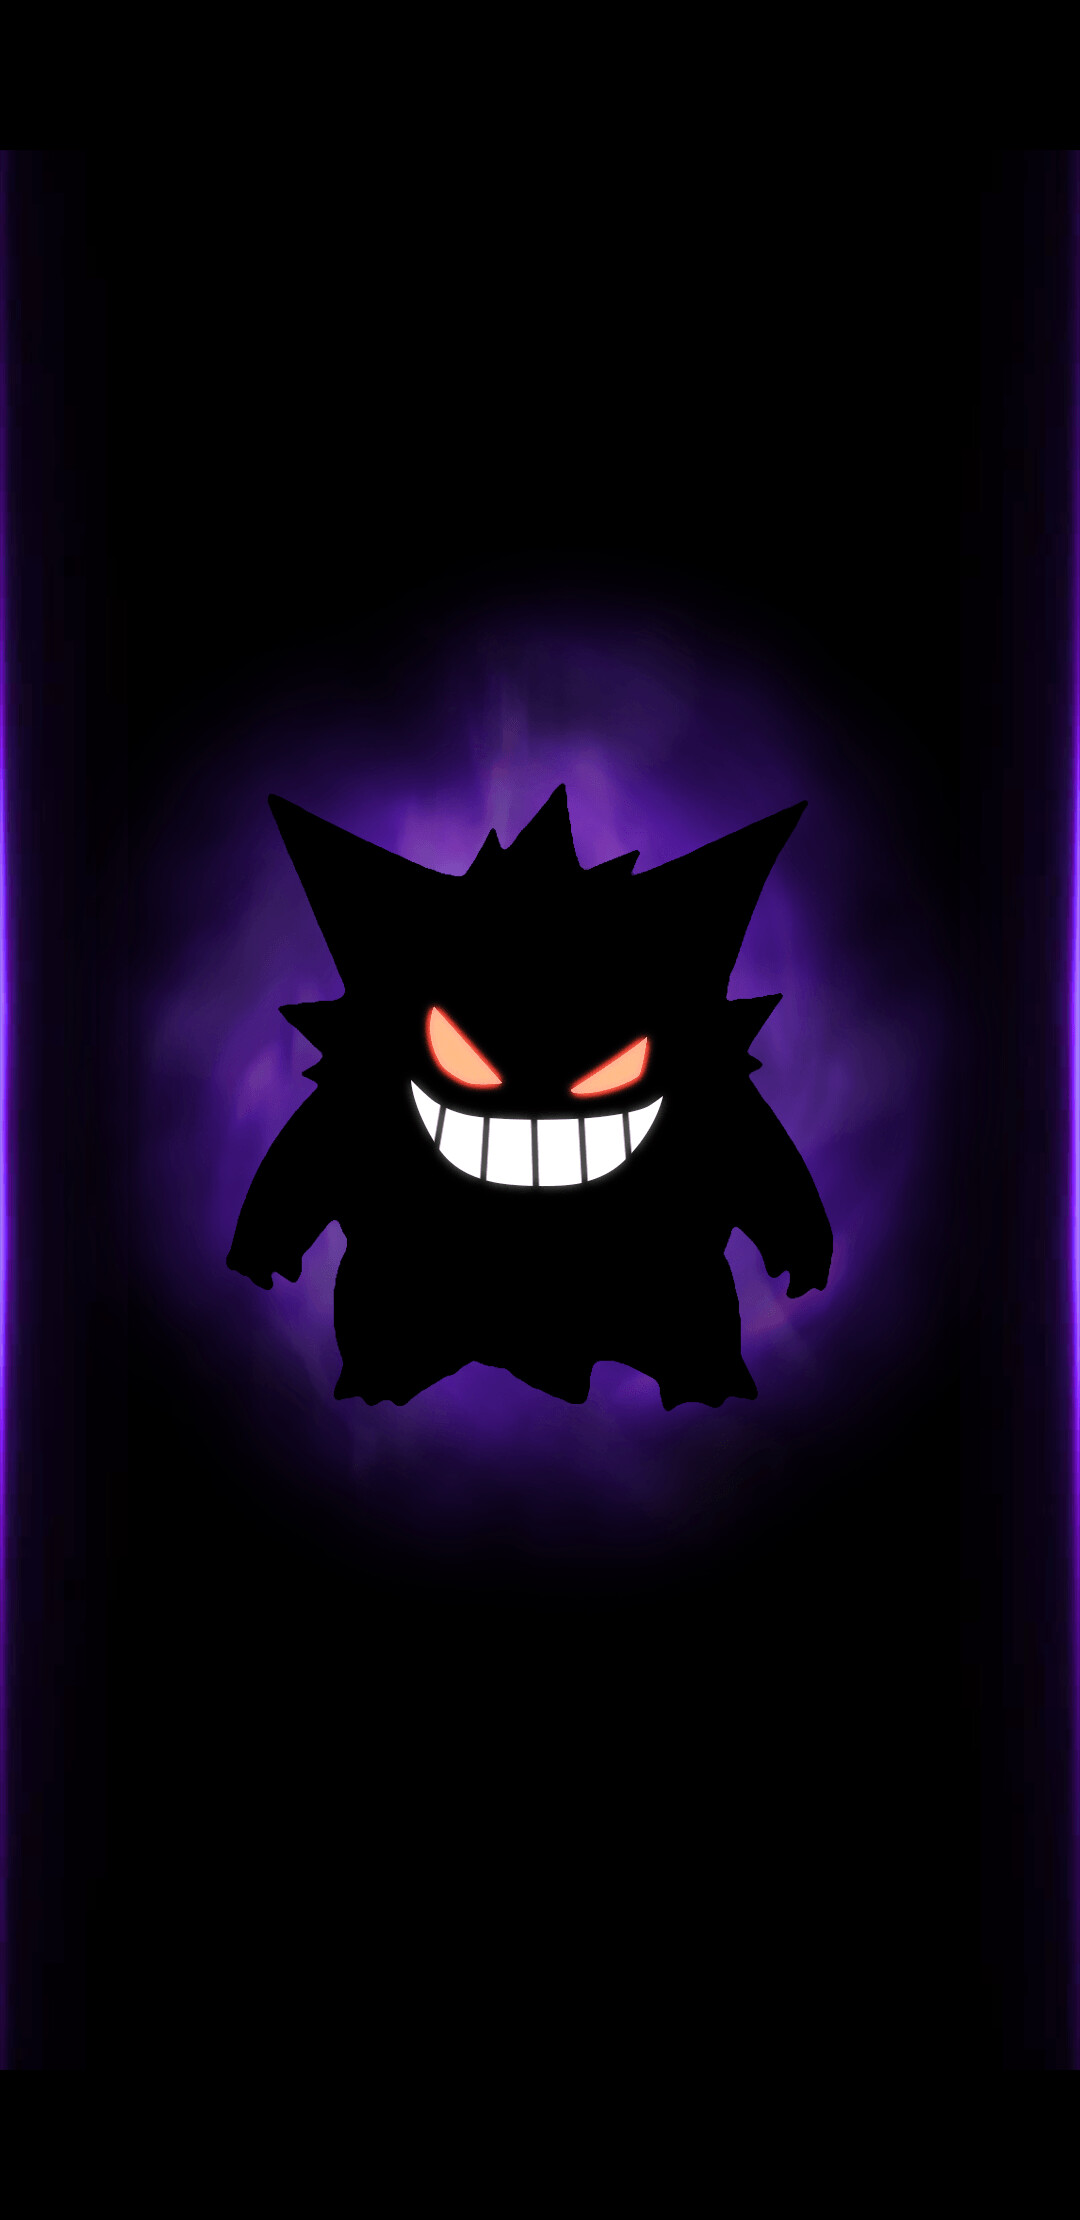 Gengar: Red eyes, A wide mouth curled into a sinister grin, Pointed ears, Numerous spikes on the back. 1080x2220 HD Wallpaper.